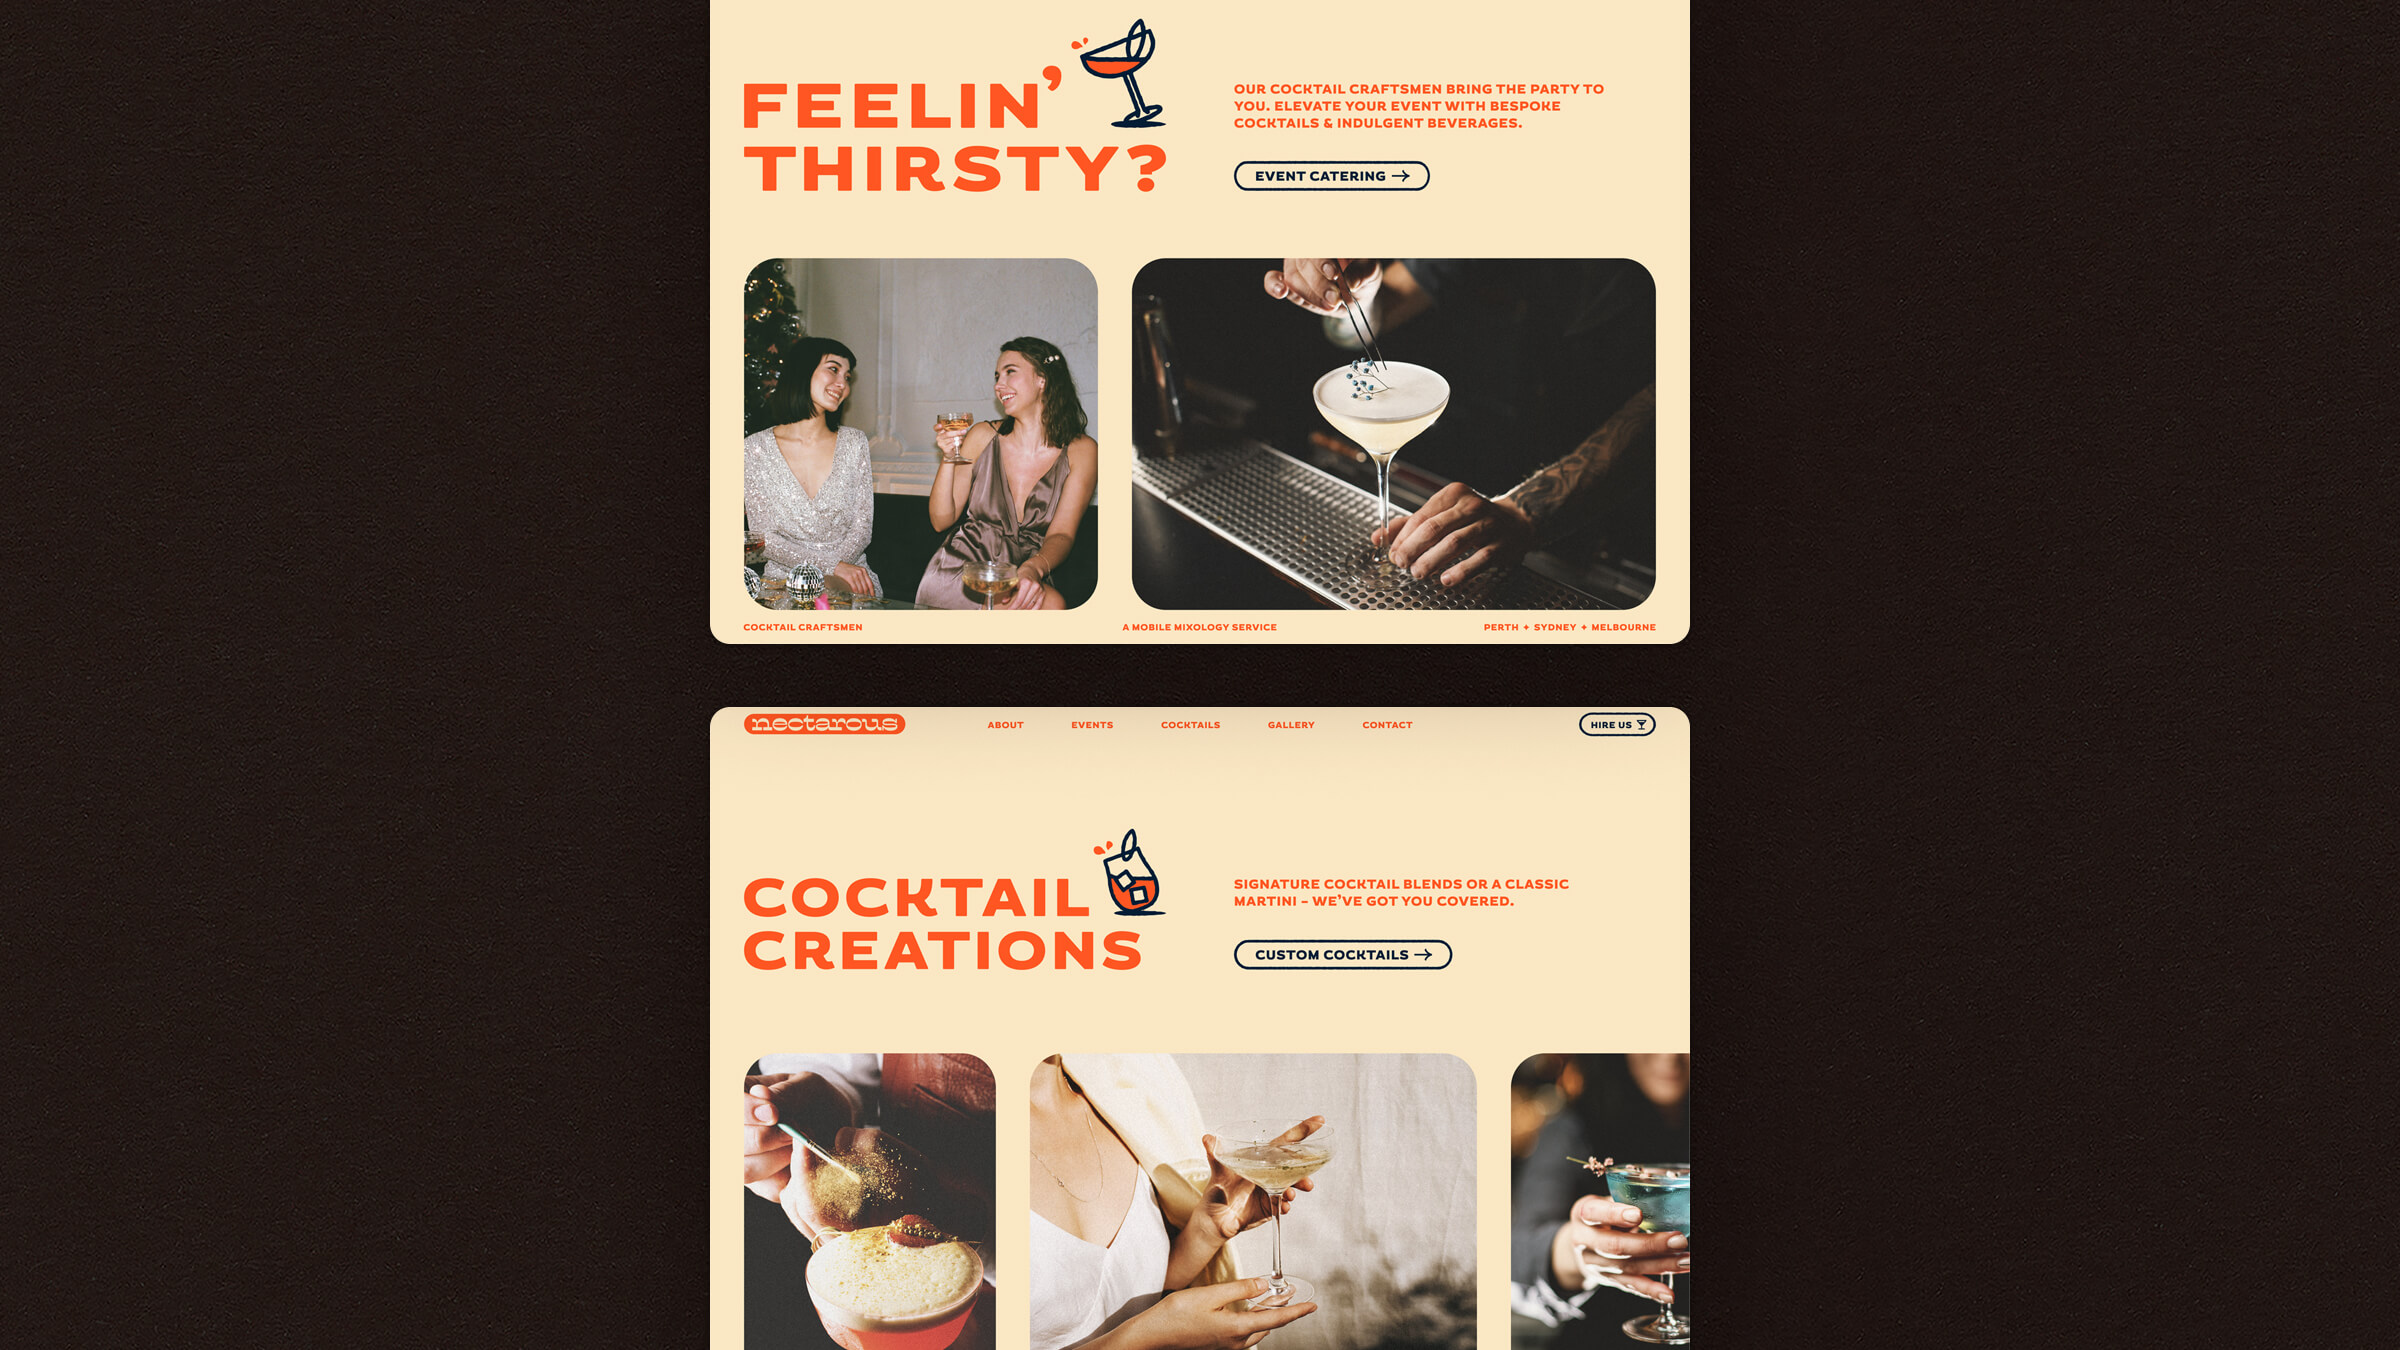 Website designs featuring film-style photography of people enjoying cocktails.